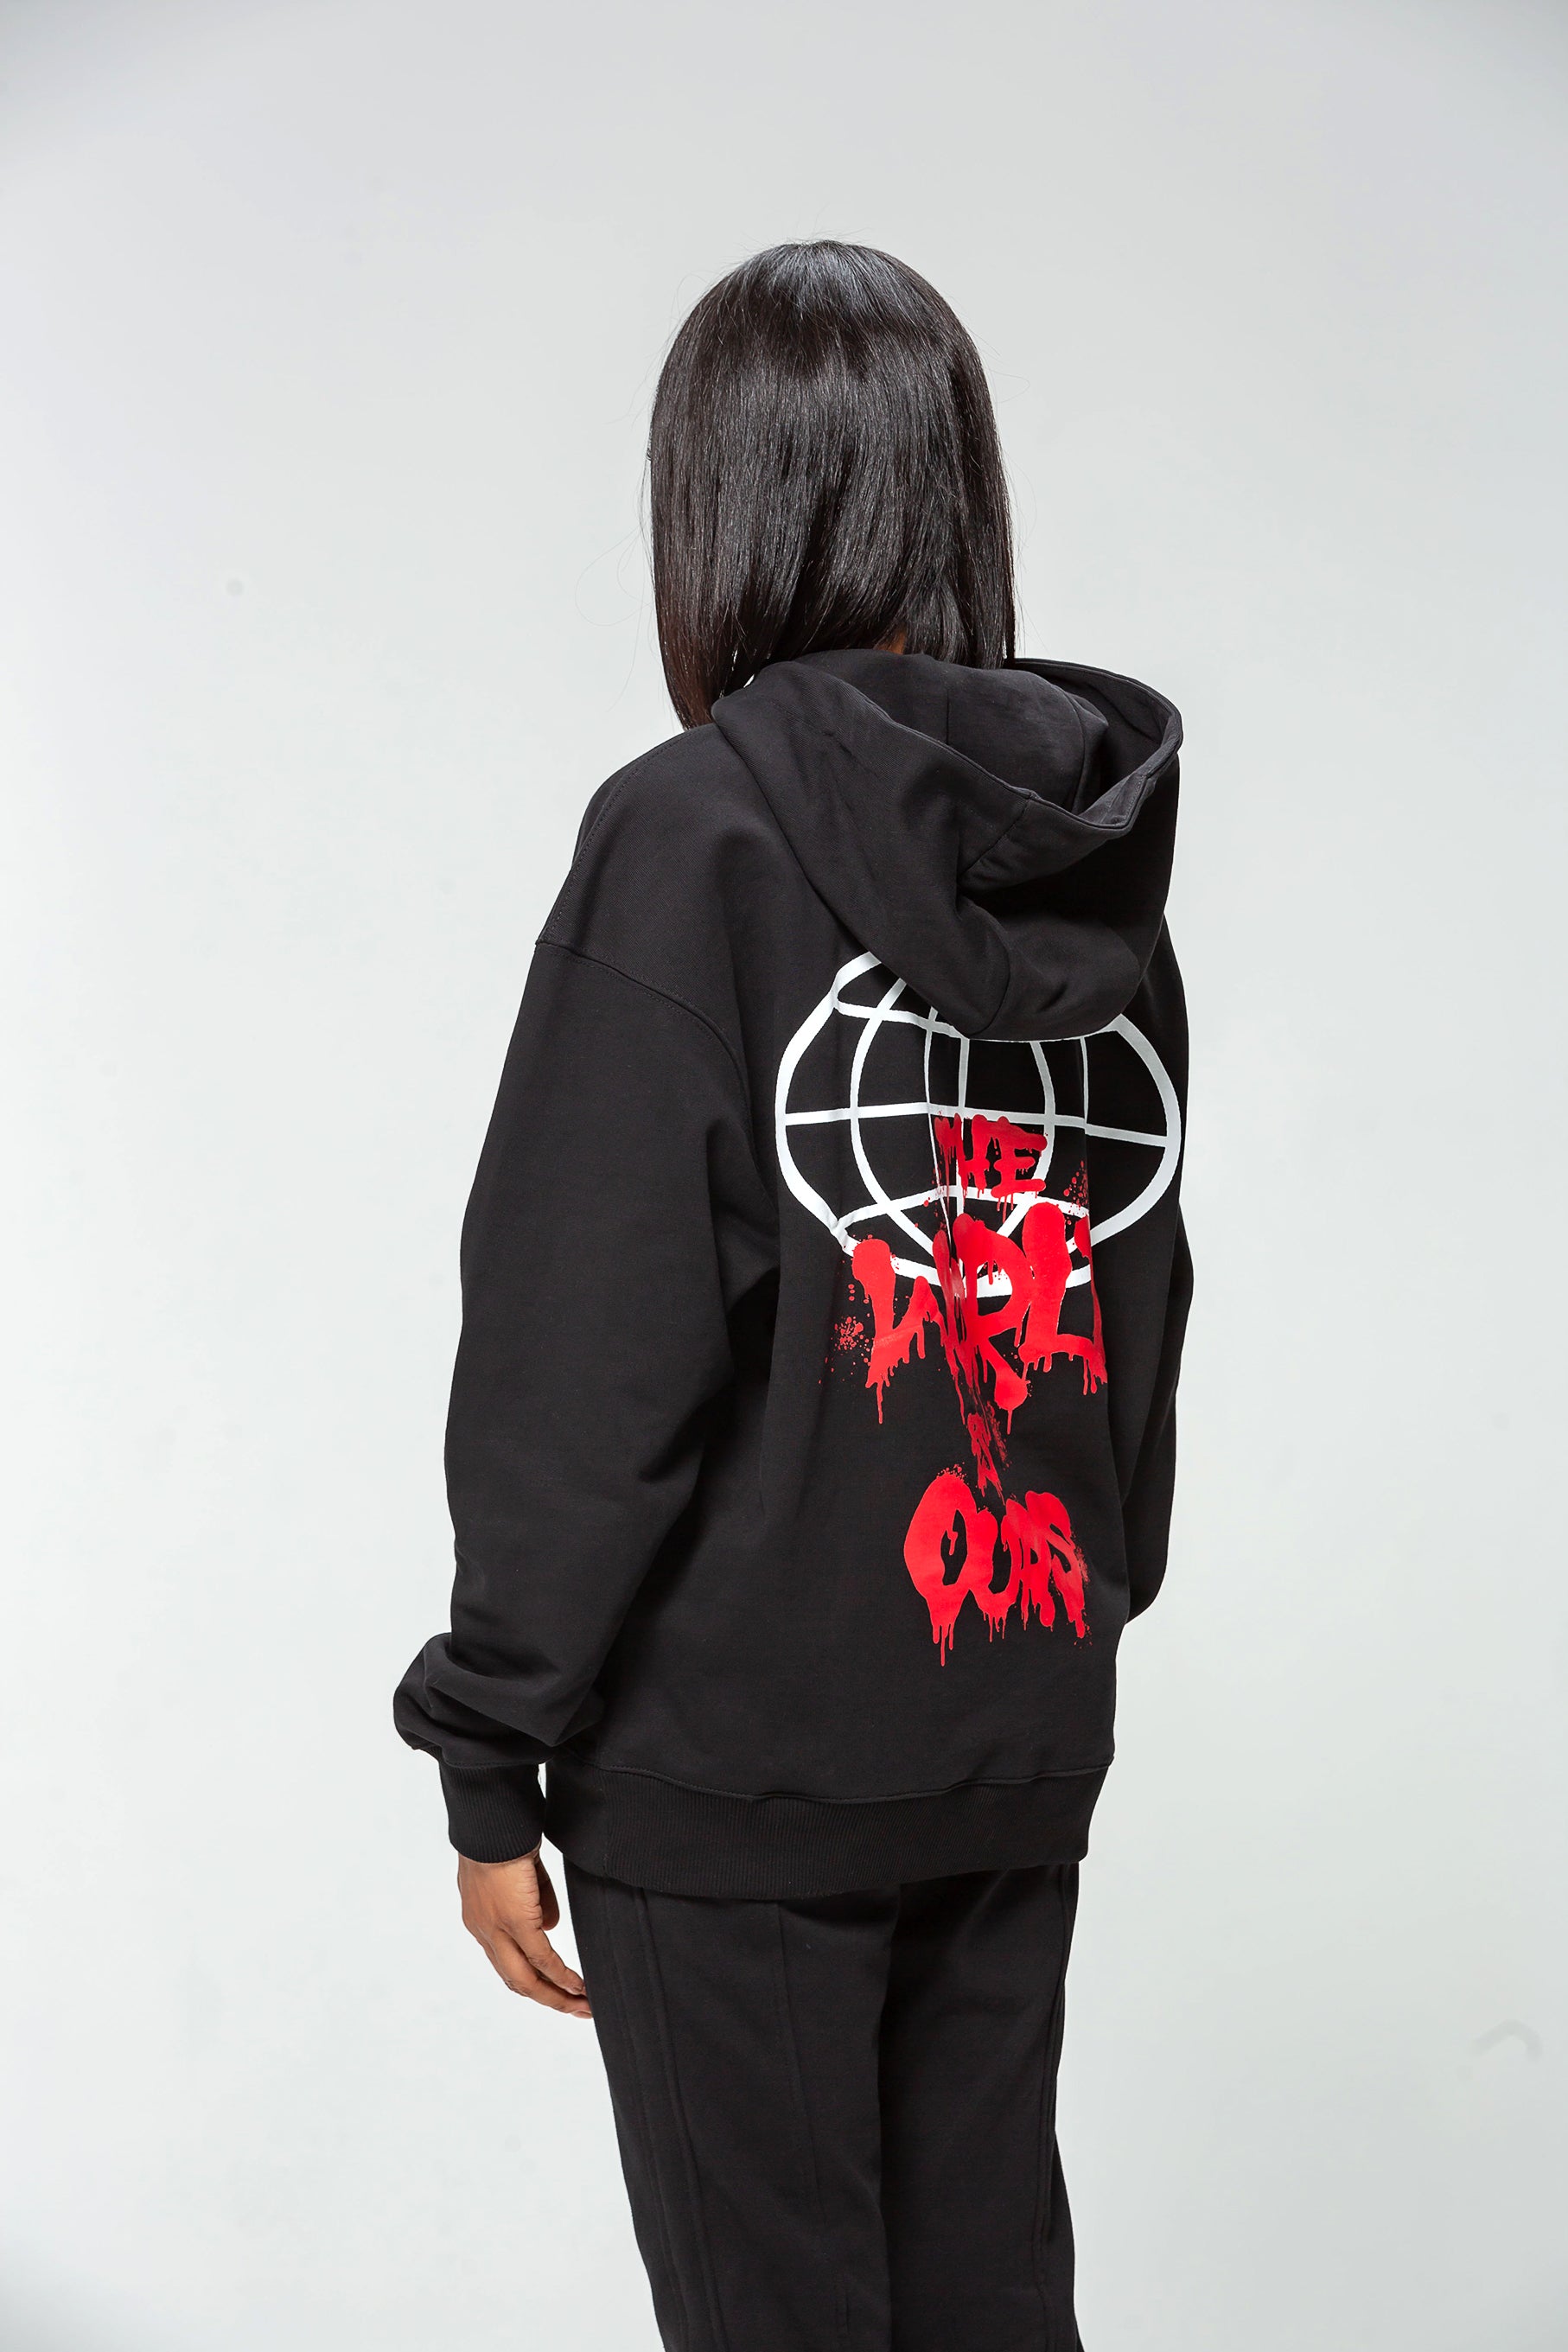 The World is yours black hoodie 